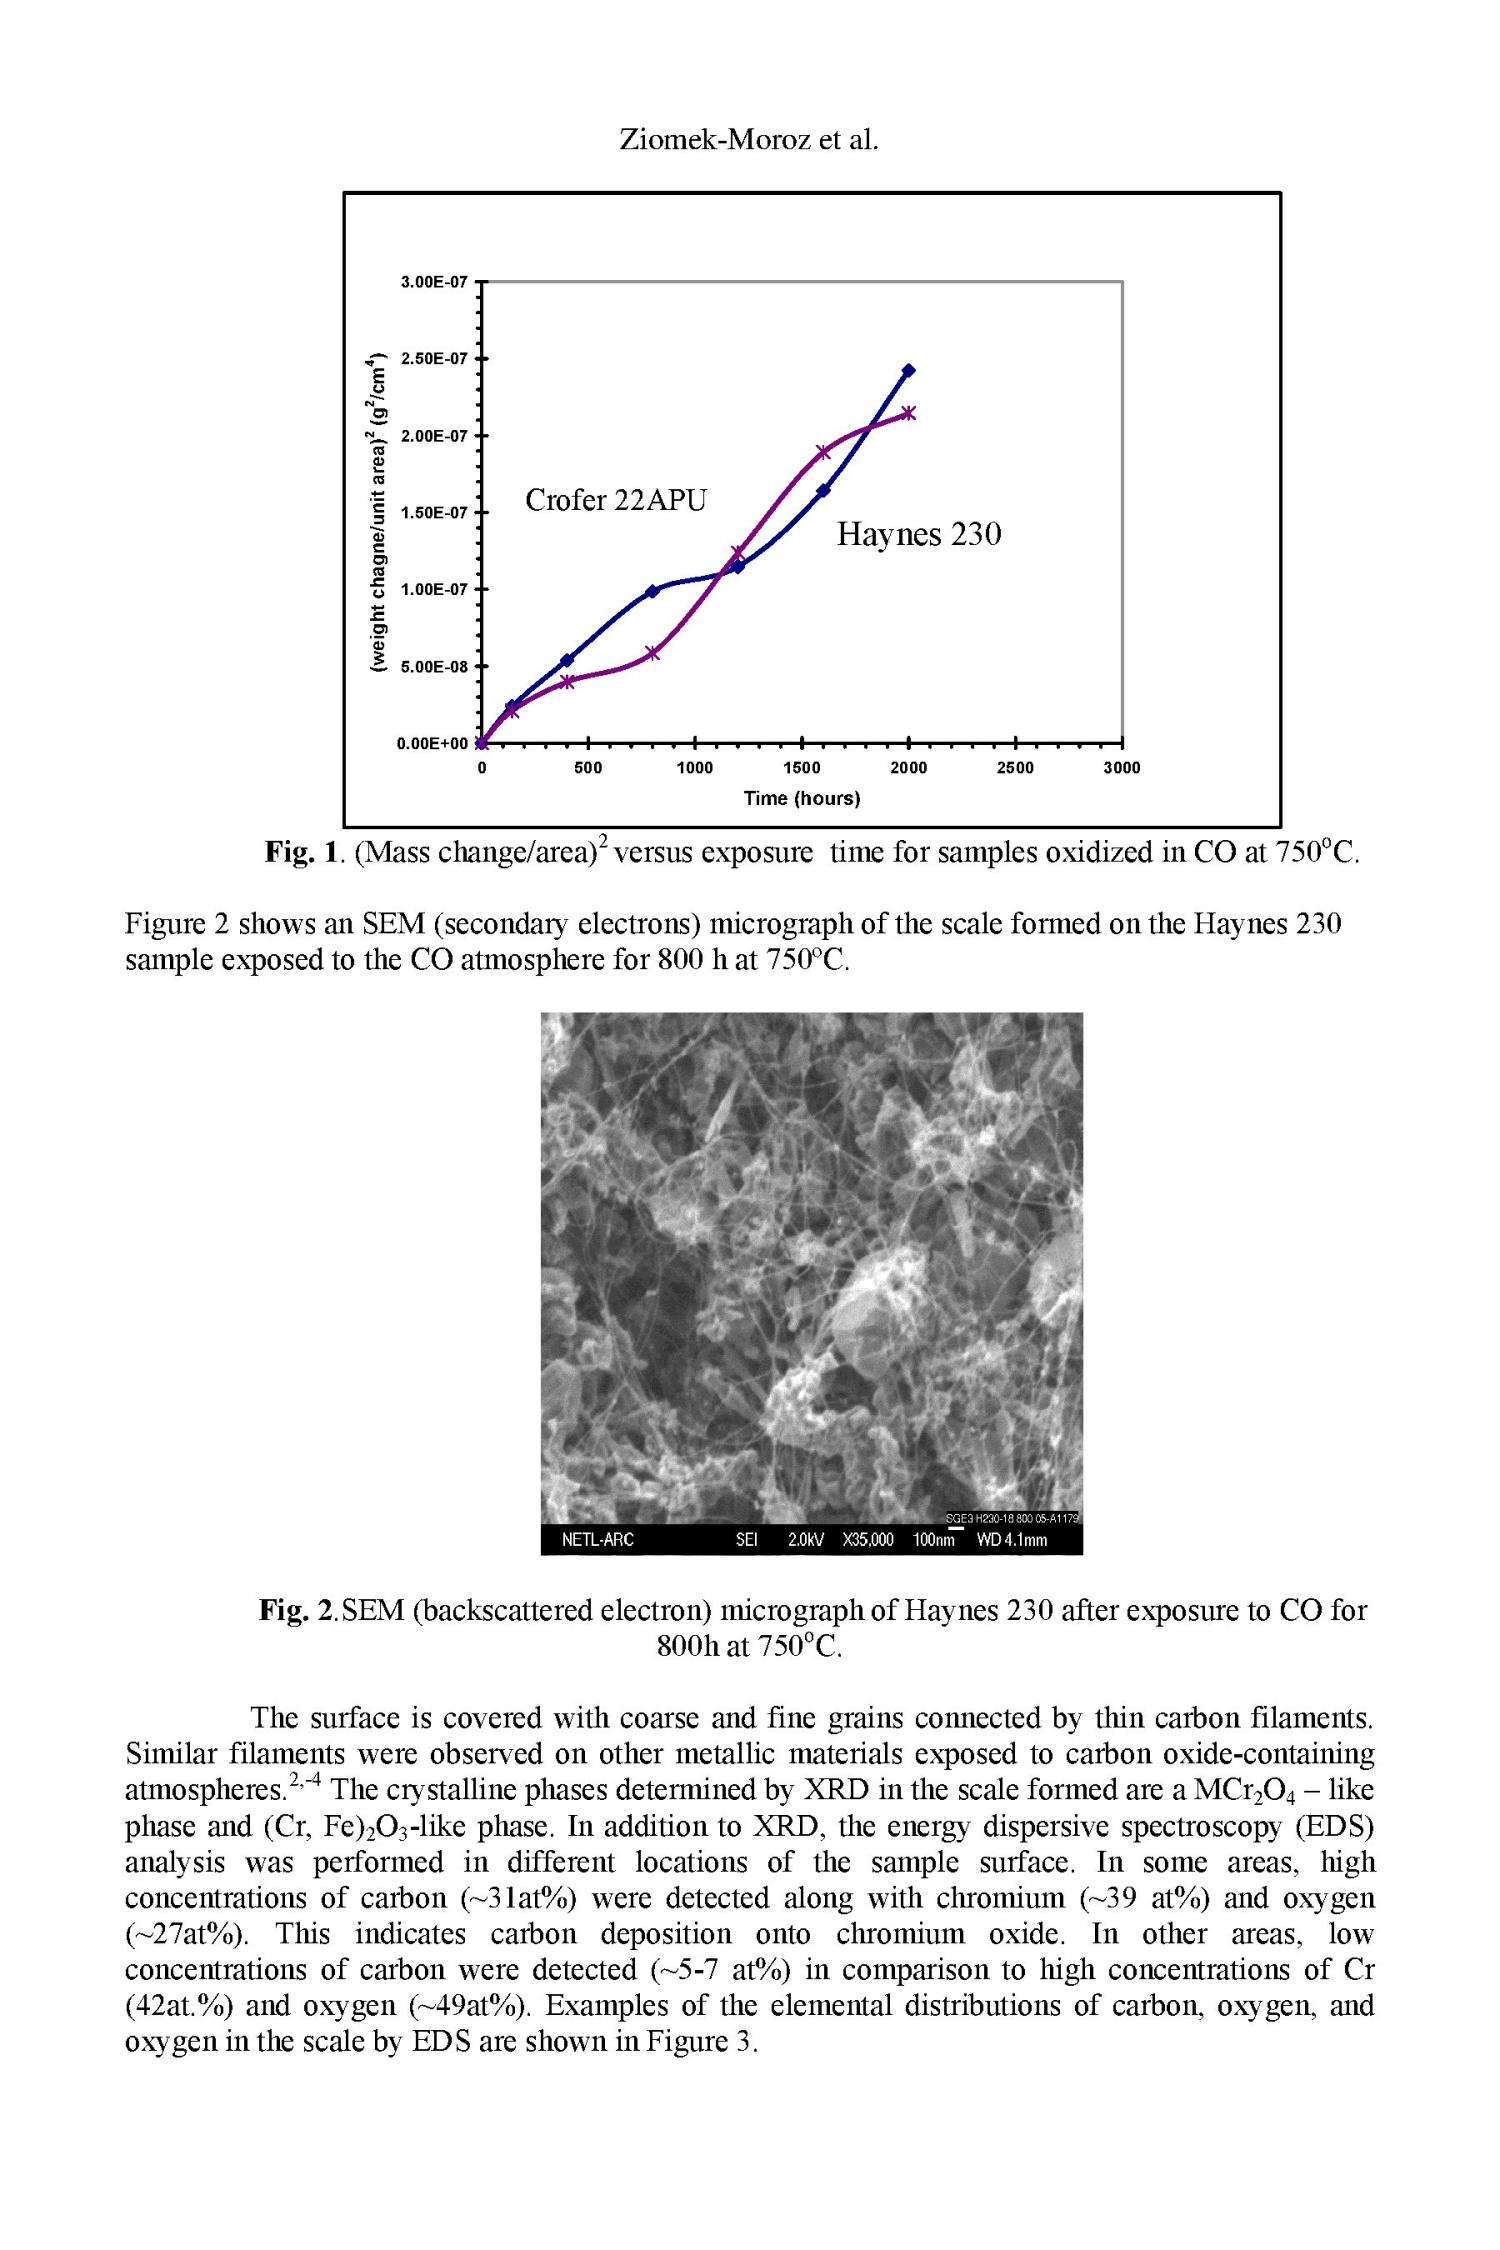 Studies of Scale Formation and Kinetics of Crofer 22 APU and Haynes 230 in Carbon Oxide-Containing Environment for SOFC Applications
                                                
                                                    [Sequence #]: 2 of 4
                                                